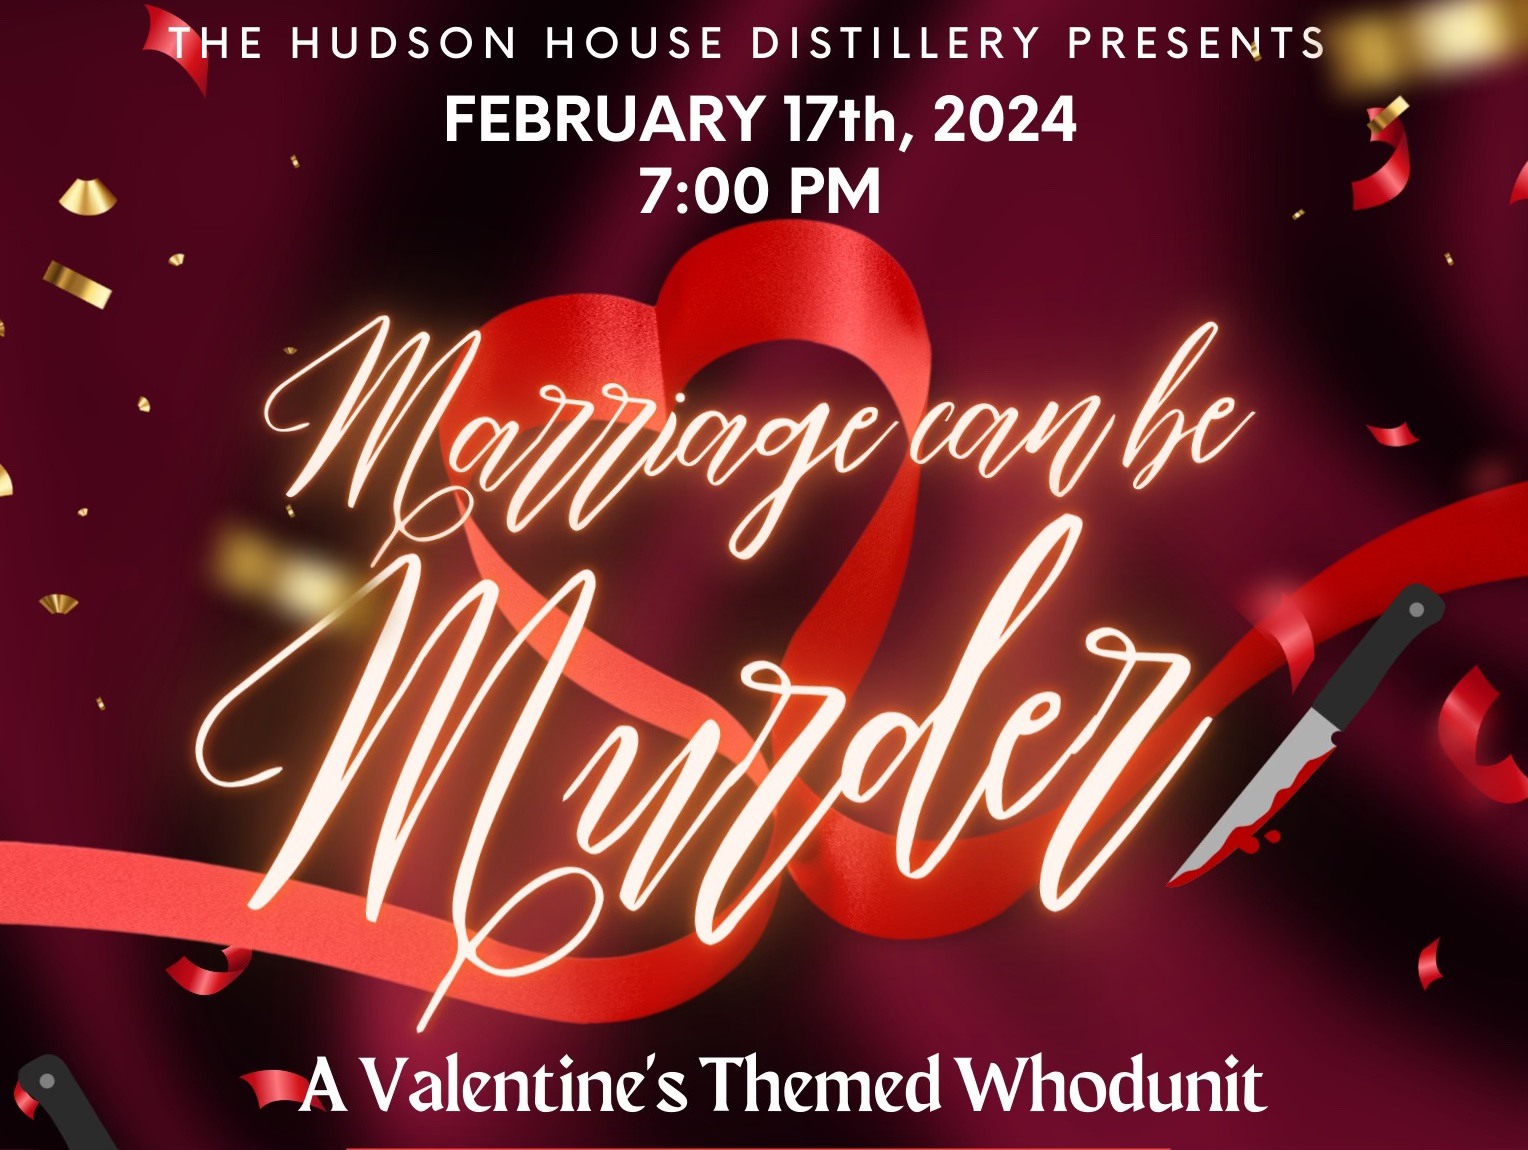 "Marriage can be Murder", A Valentine's Themed Whodunit